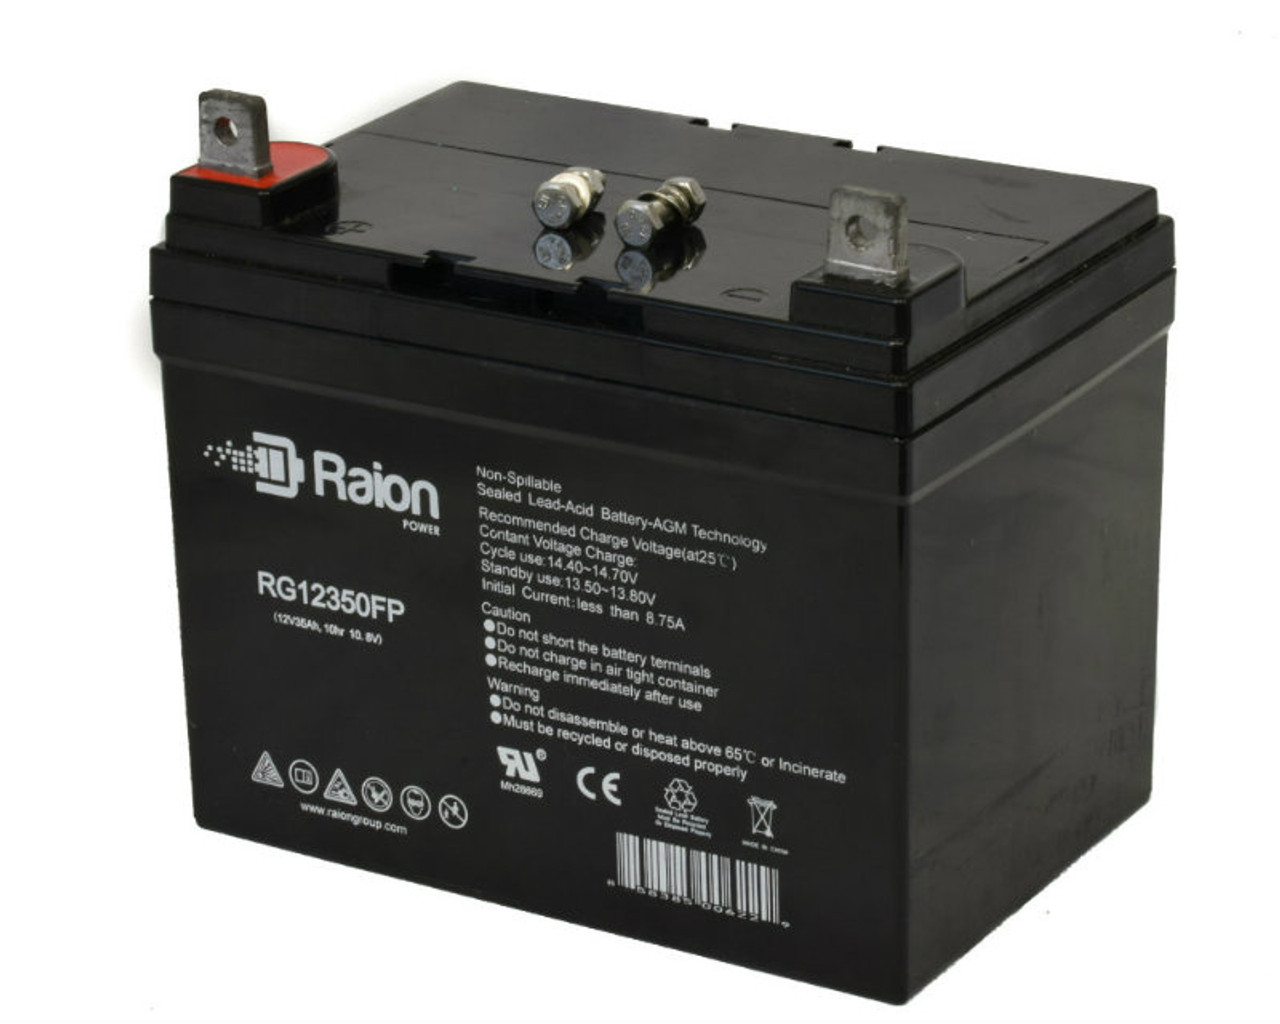 Raion Power Replacement 12V 35Ah RG12350FP Mobility Scooter Battery for Everest & Jennings Wheelchairs Captain CTR 1000